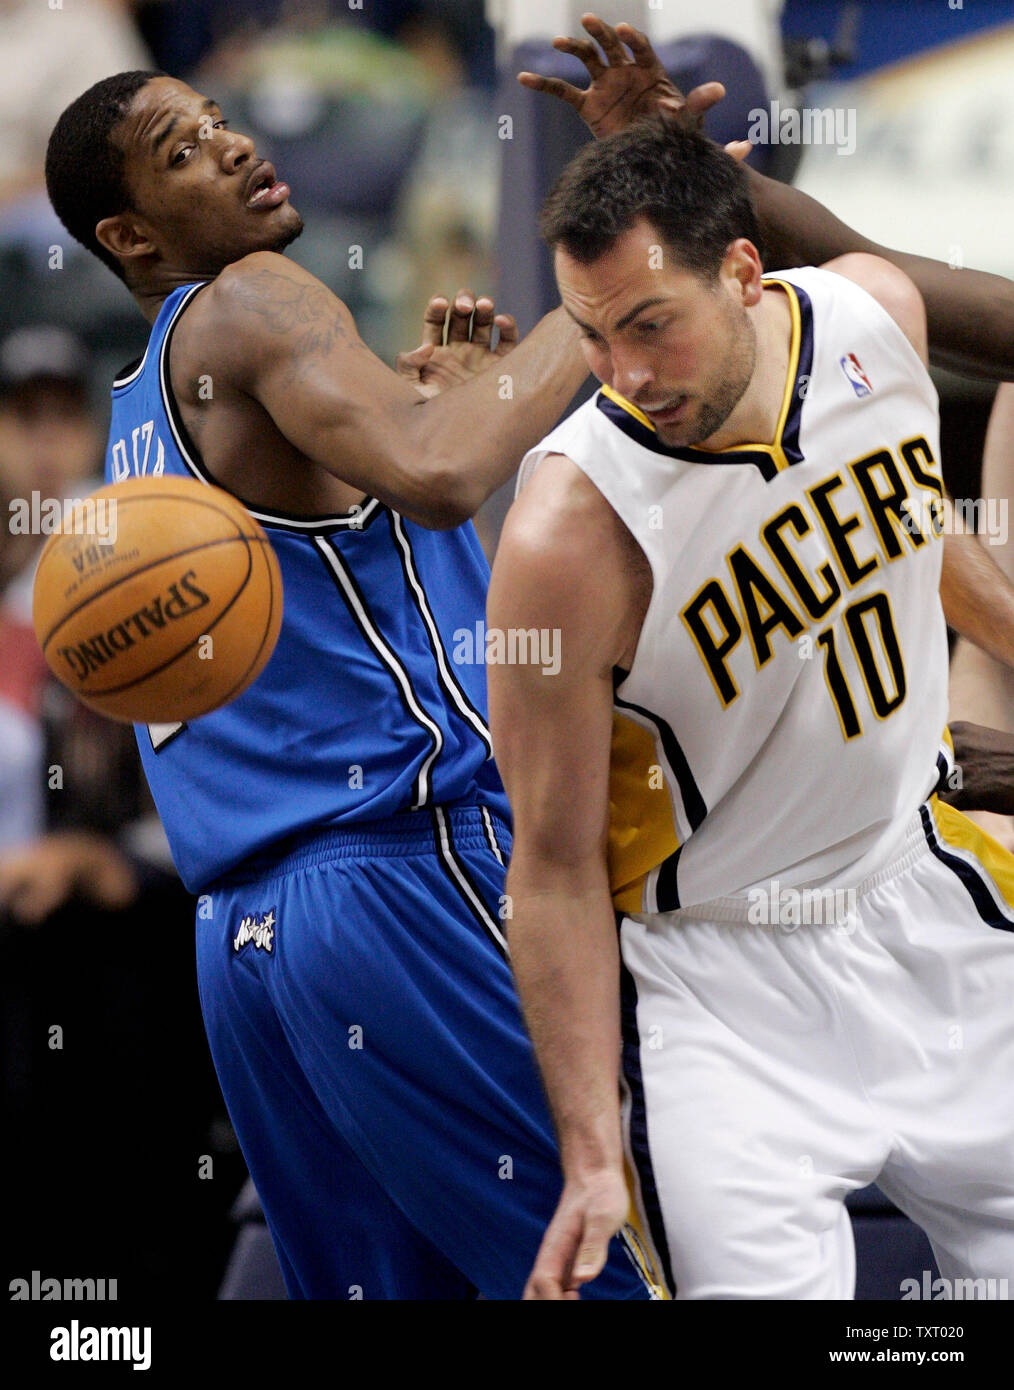 Indianapolis Pacers forward Jeff Foster (10) and Orlando Magic forward Trevor Ariza (1) watch a loose ball during the second half at Conseco Fieldhouse in Indianapolis, In April 19, 2006. (UPI Photo/Mark Cowan) Stock Photo